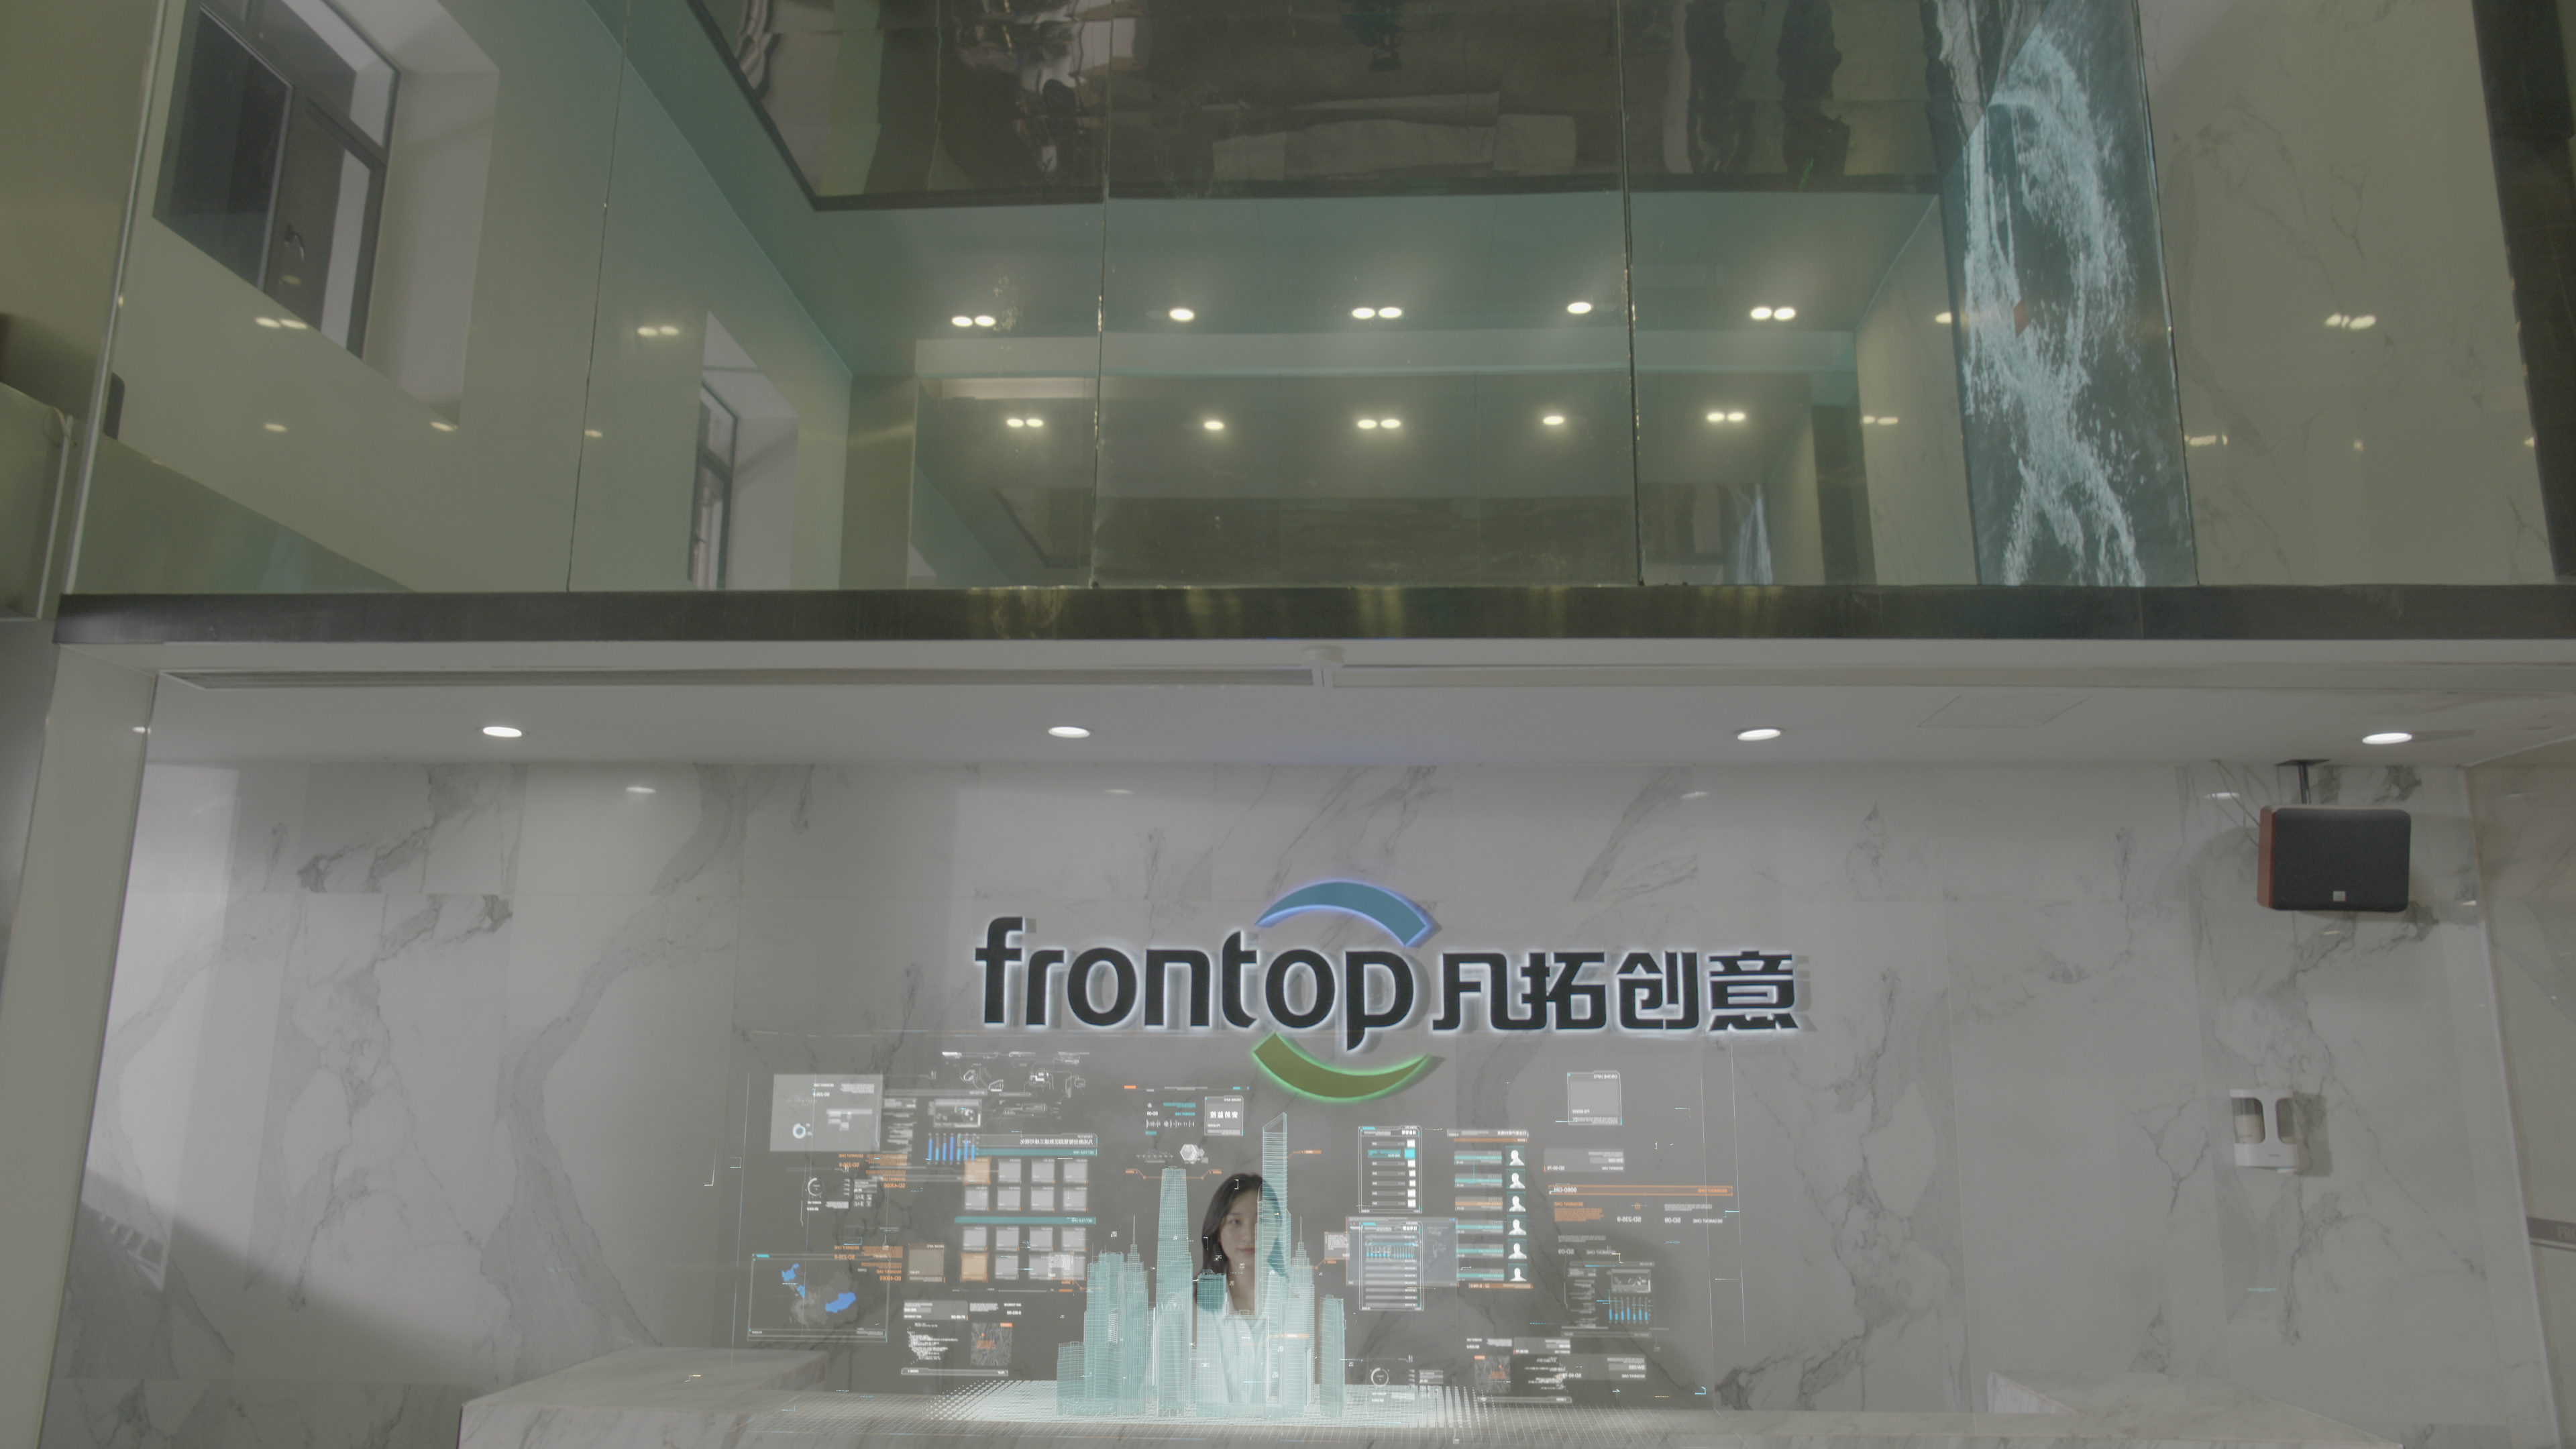 Frontop Celebrates 20 Years and Launches New Website